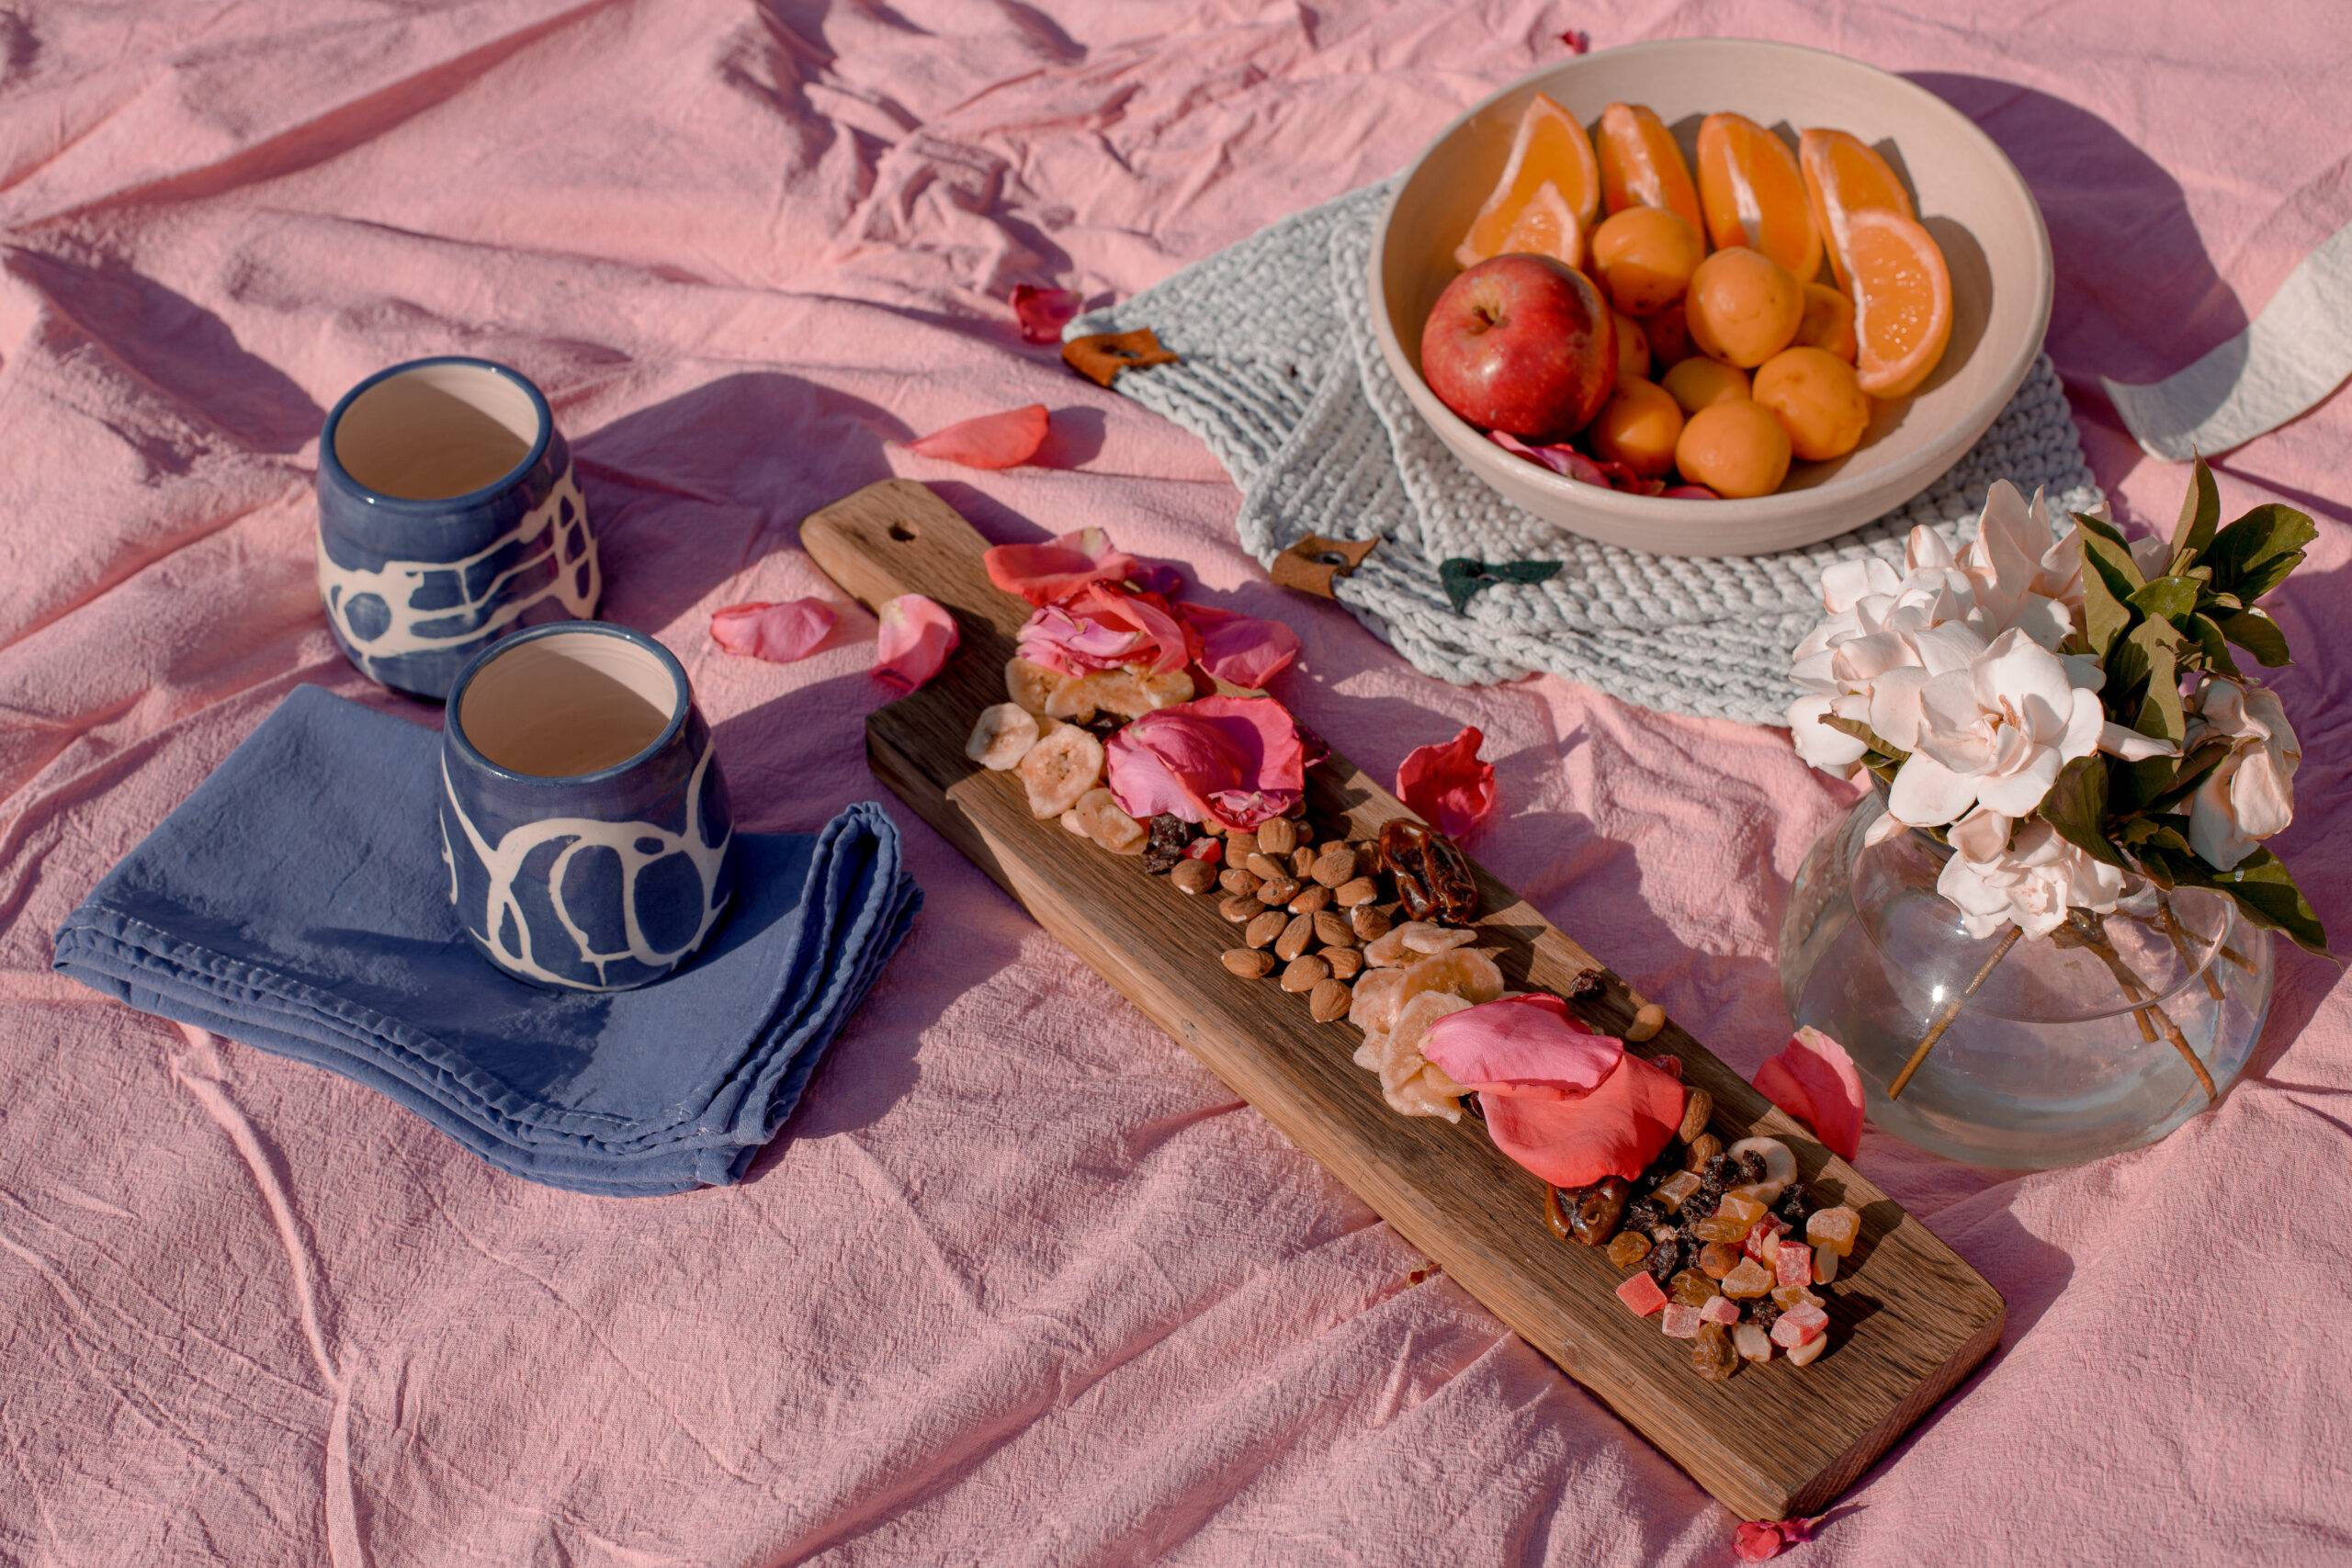 Picnic In The Park With Ceramic Cups, Lots Of Fruits